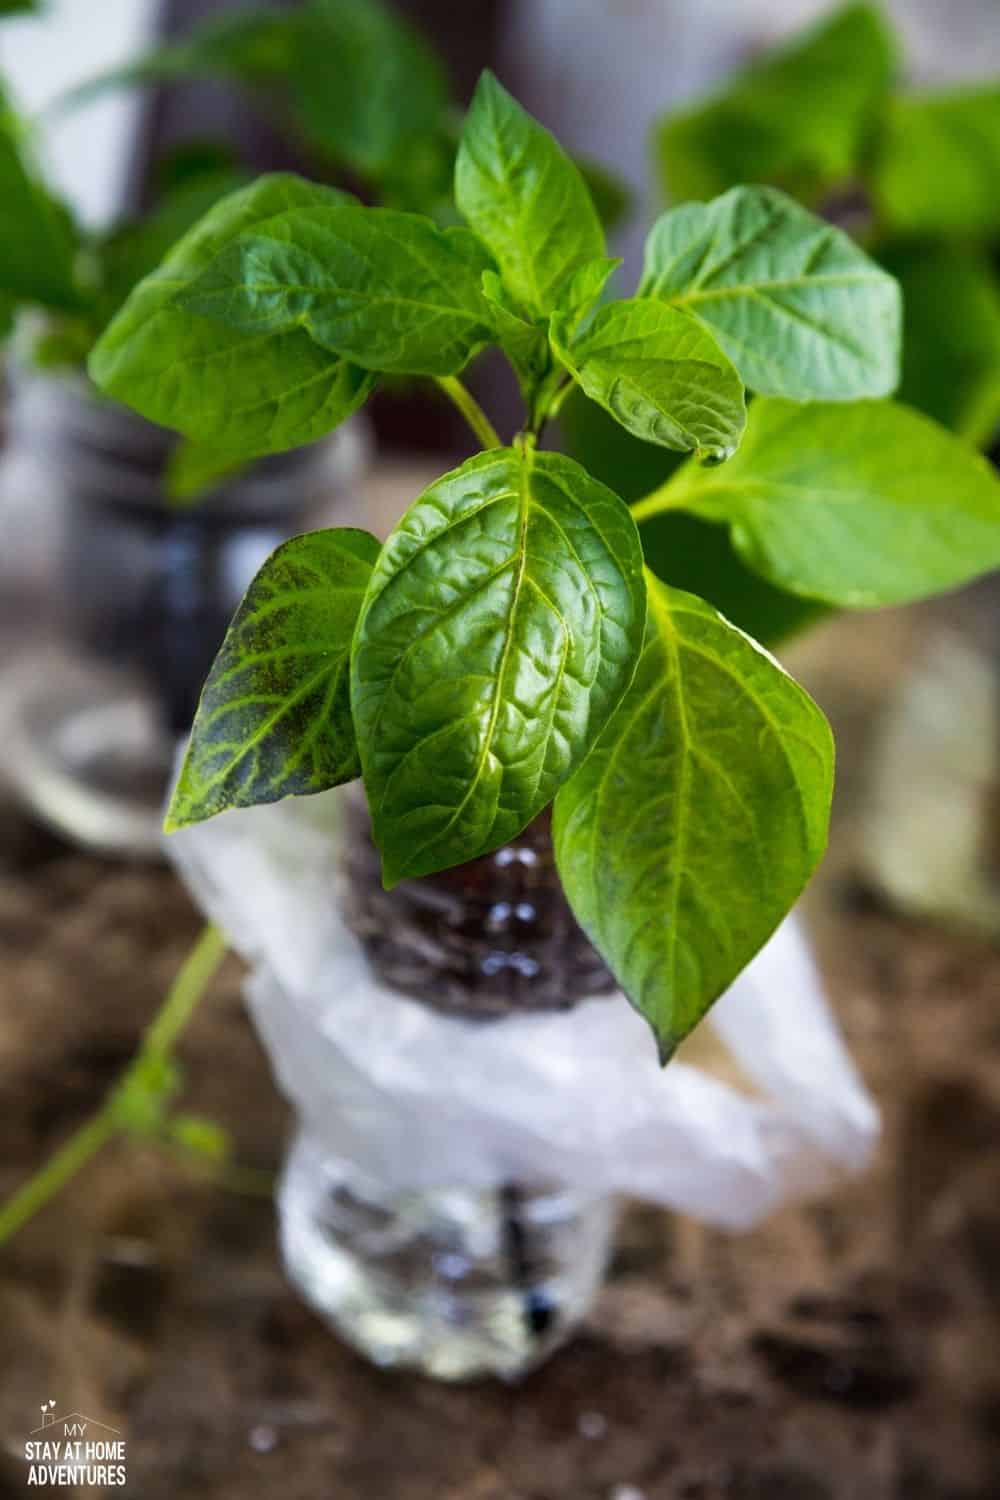 Check out this awesome DIY Self-Watering Plastic Bottle Seed Starter you can do with your kids! A step by step guide showing you how to create a self-watering seed starter using plastic water bottles. The good news is that they do work! via @mystayathome